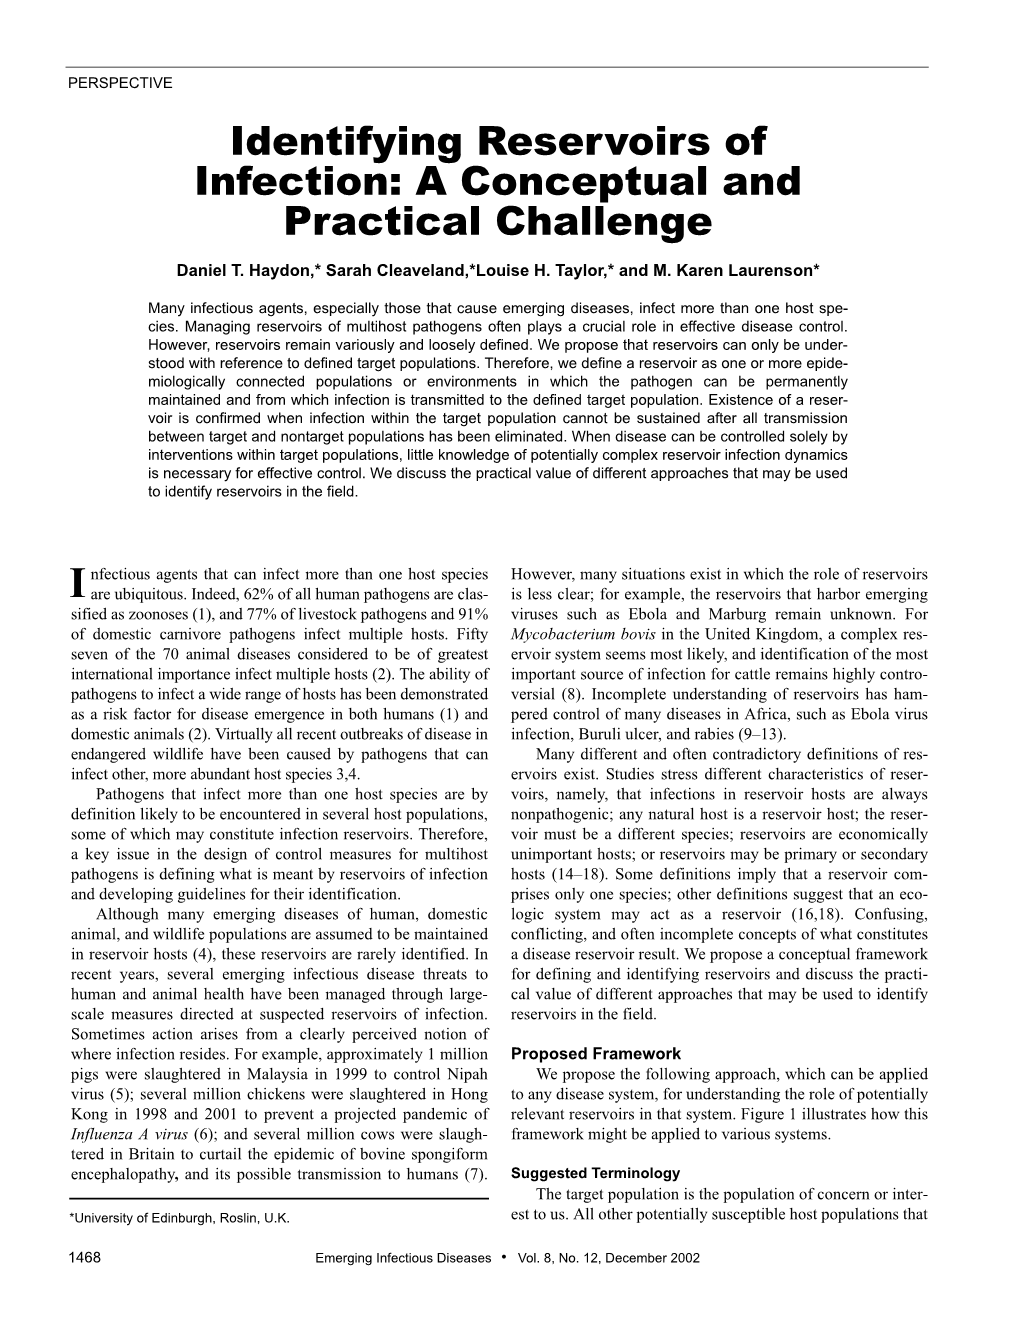 Identifying Reservoirs of Infection: a Conceptual and Practical Challenge Daniel T